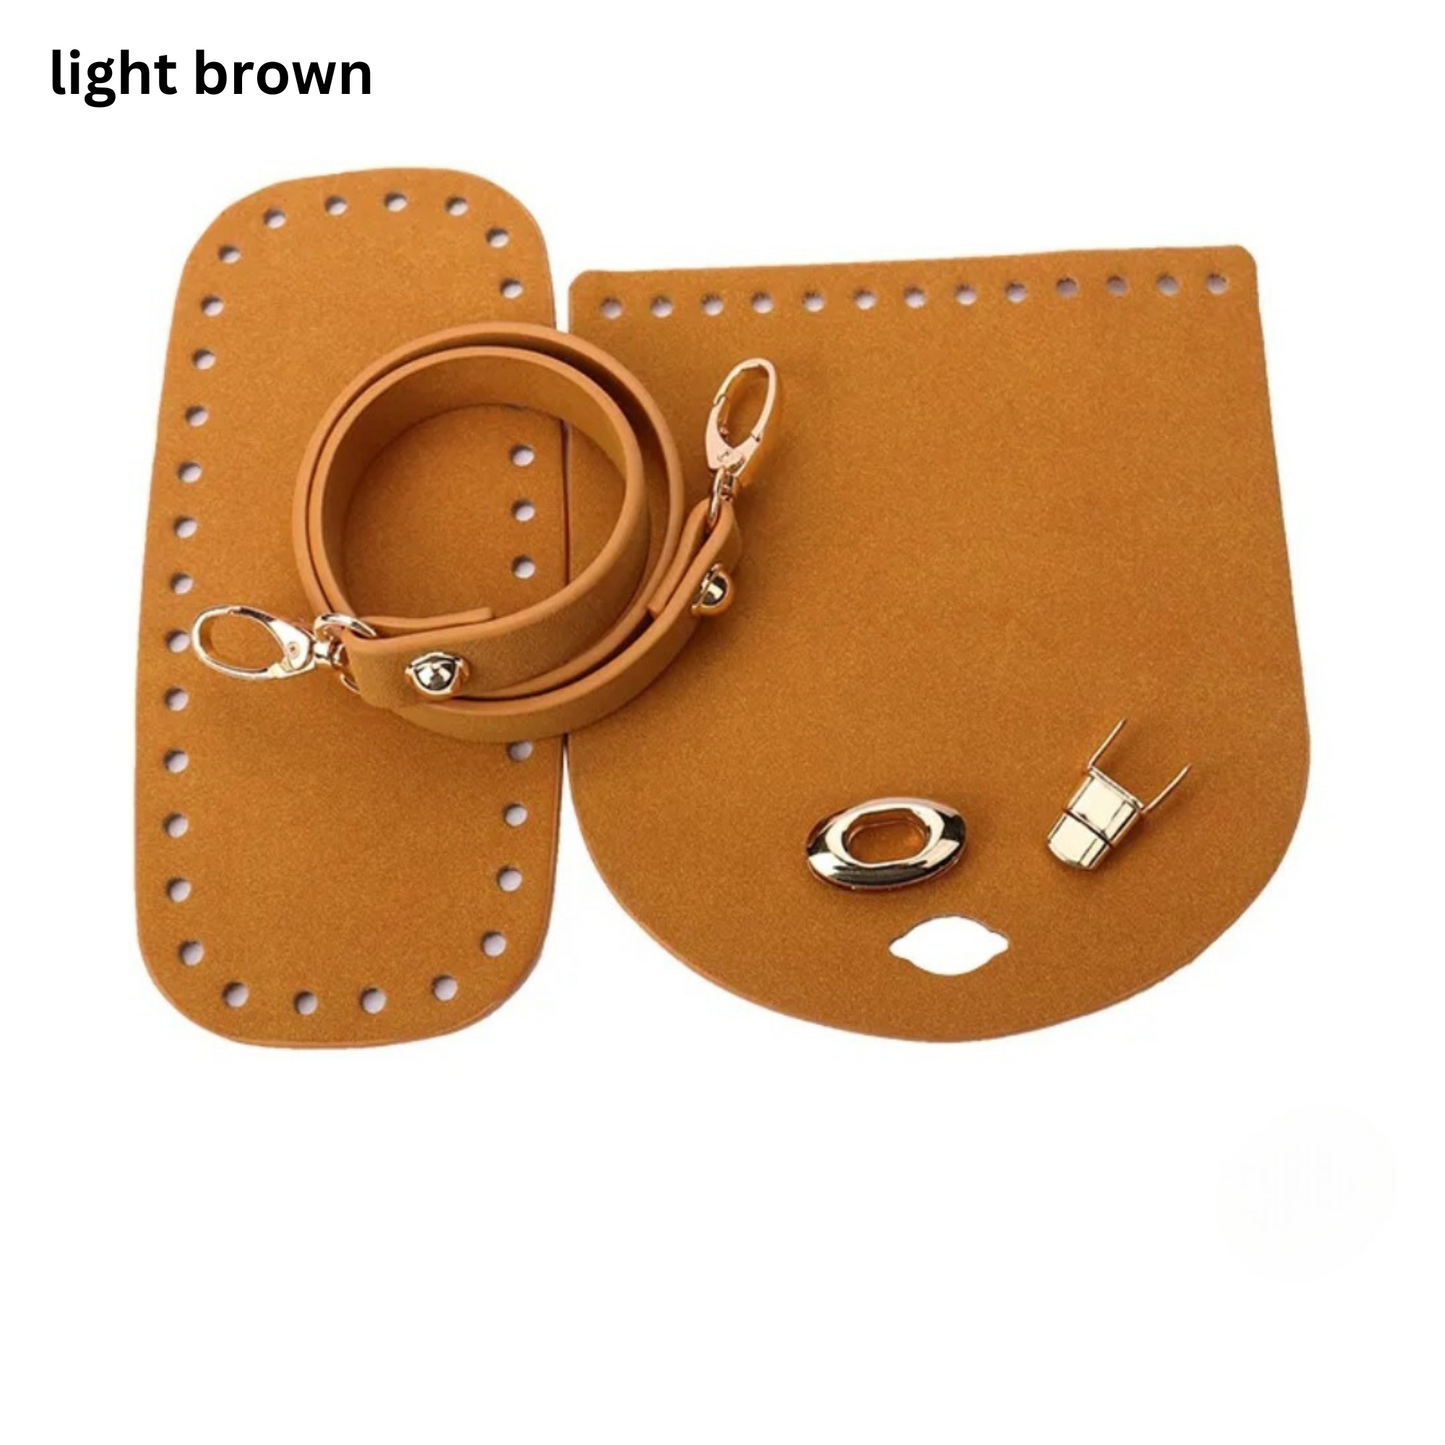 Leather Bottom with cover flap and purse strap set for Crochet Bag Making